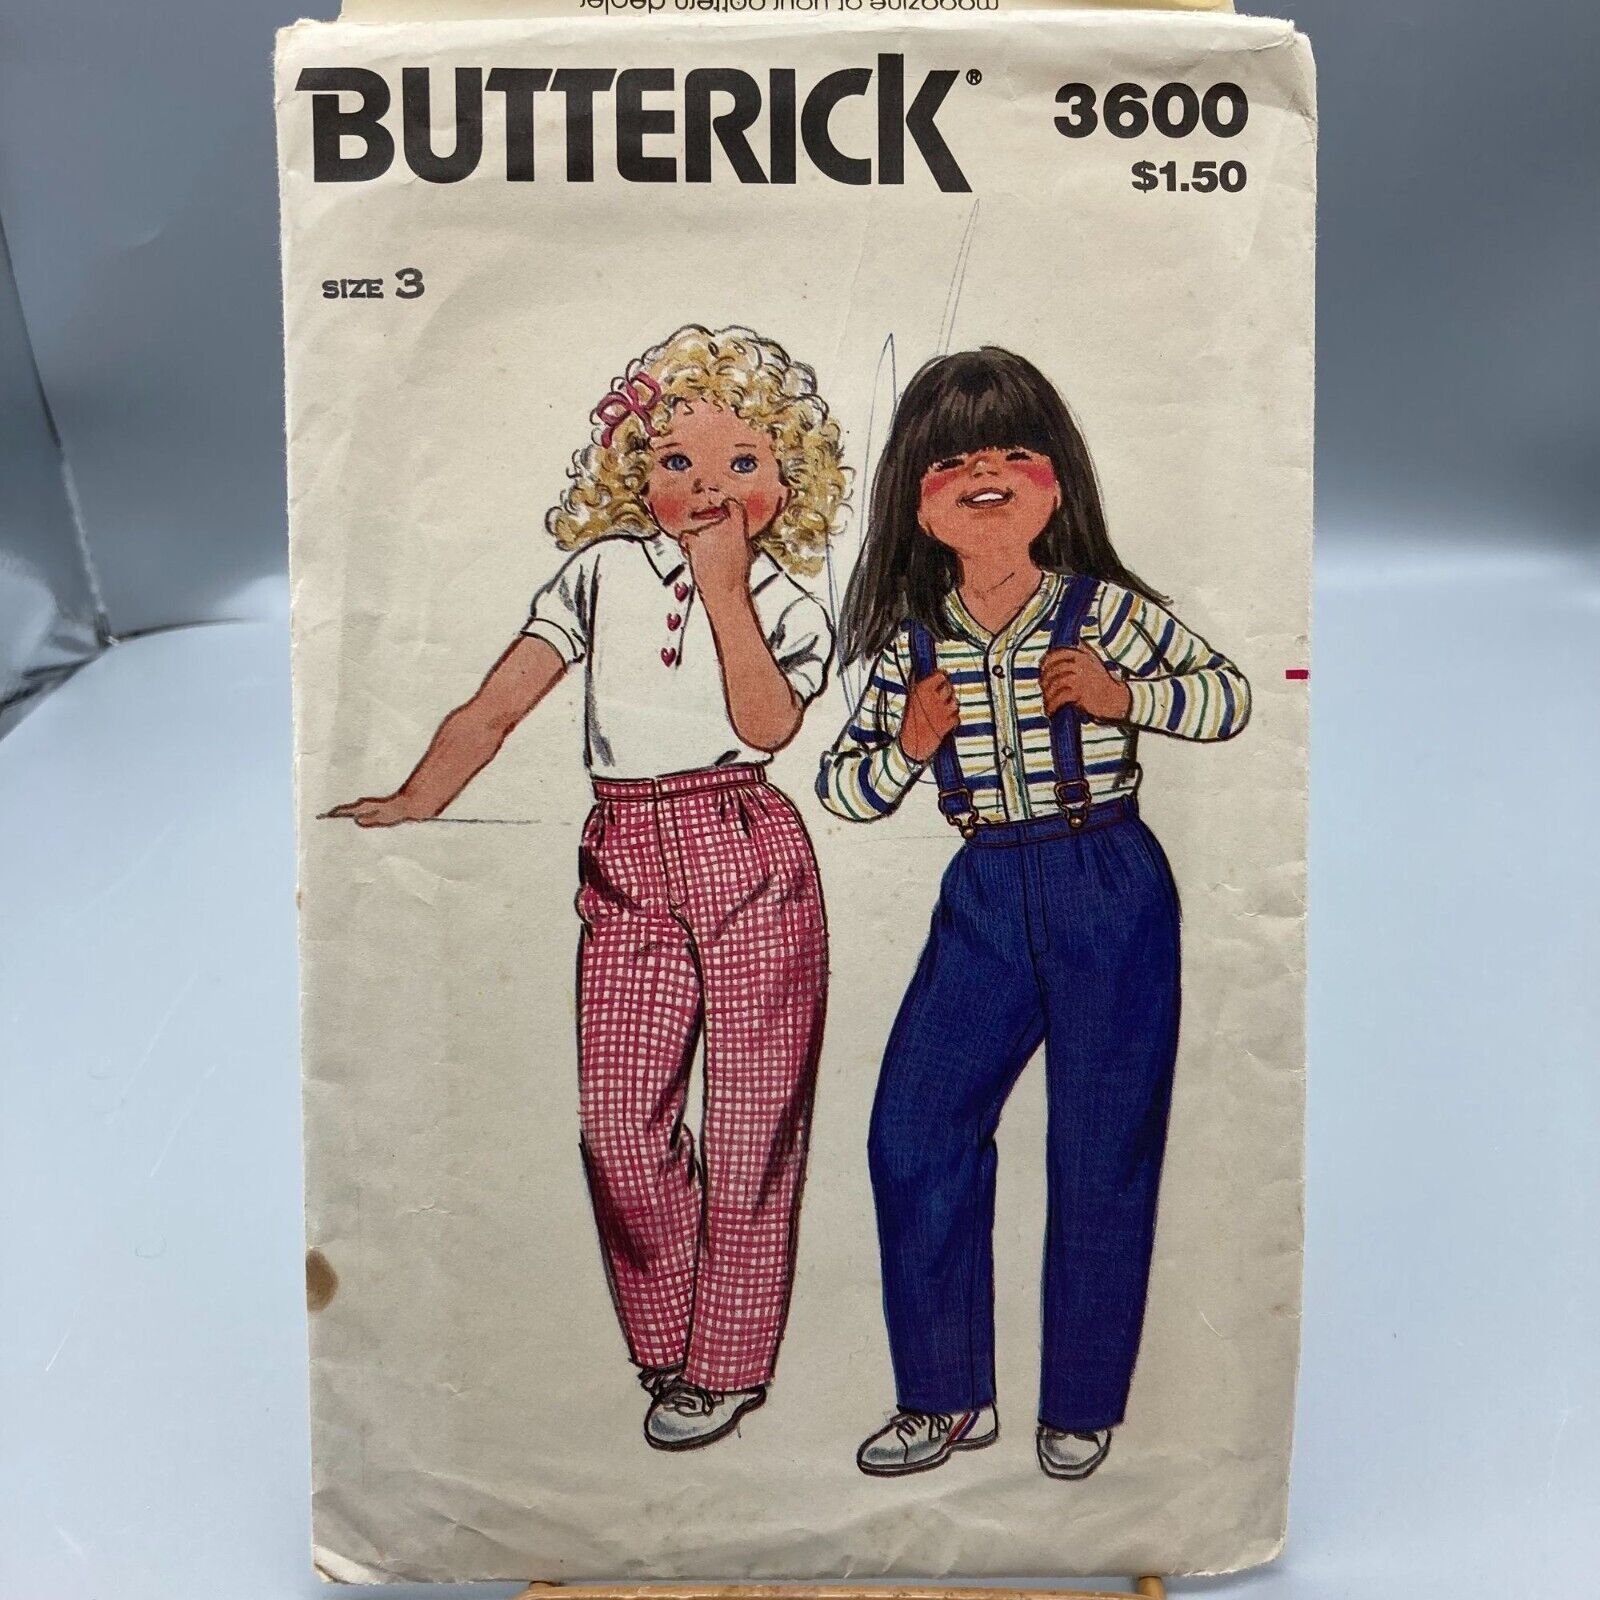 Vintage Sewing PATTERN Butterick 3600, Unisex Childrens 1980s Jeans and Suspende - $14.52